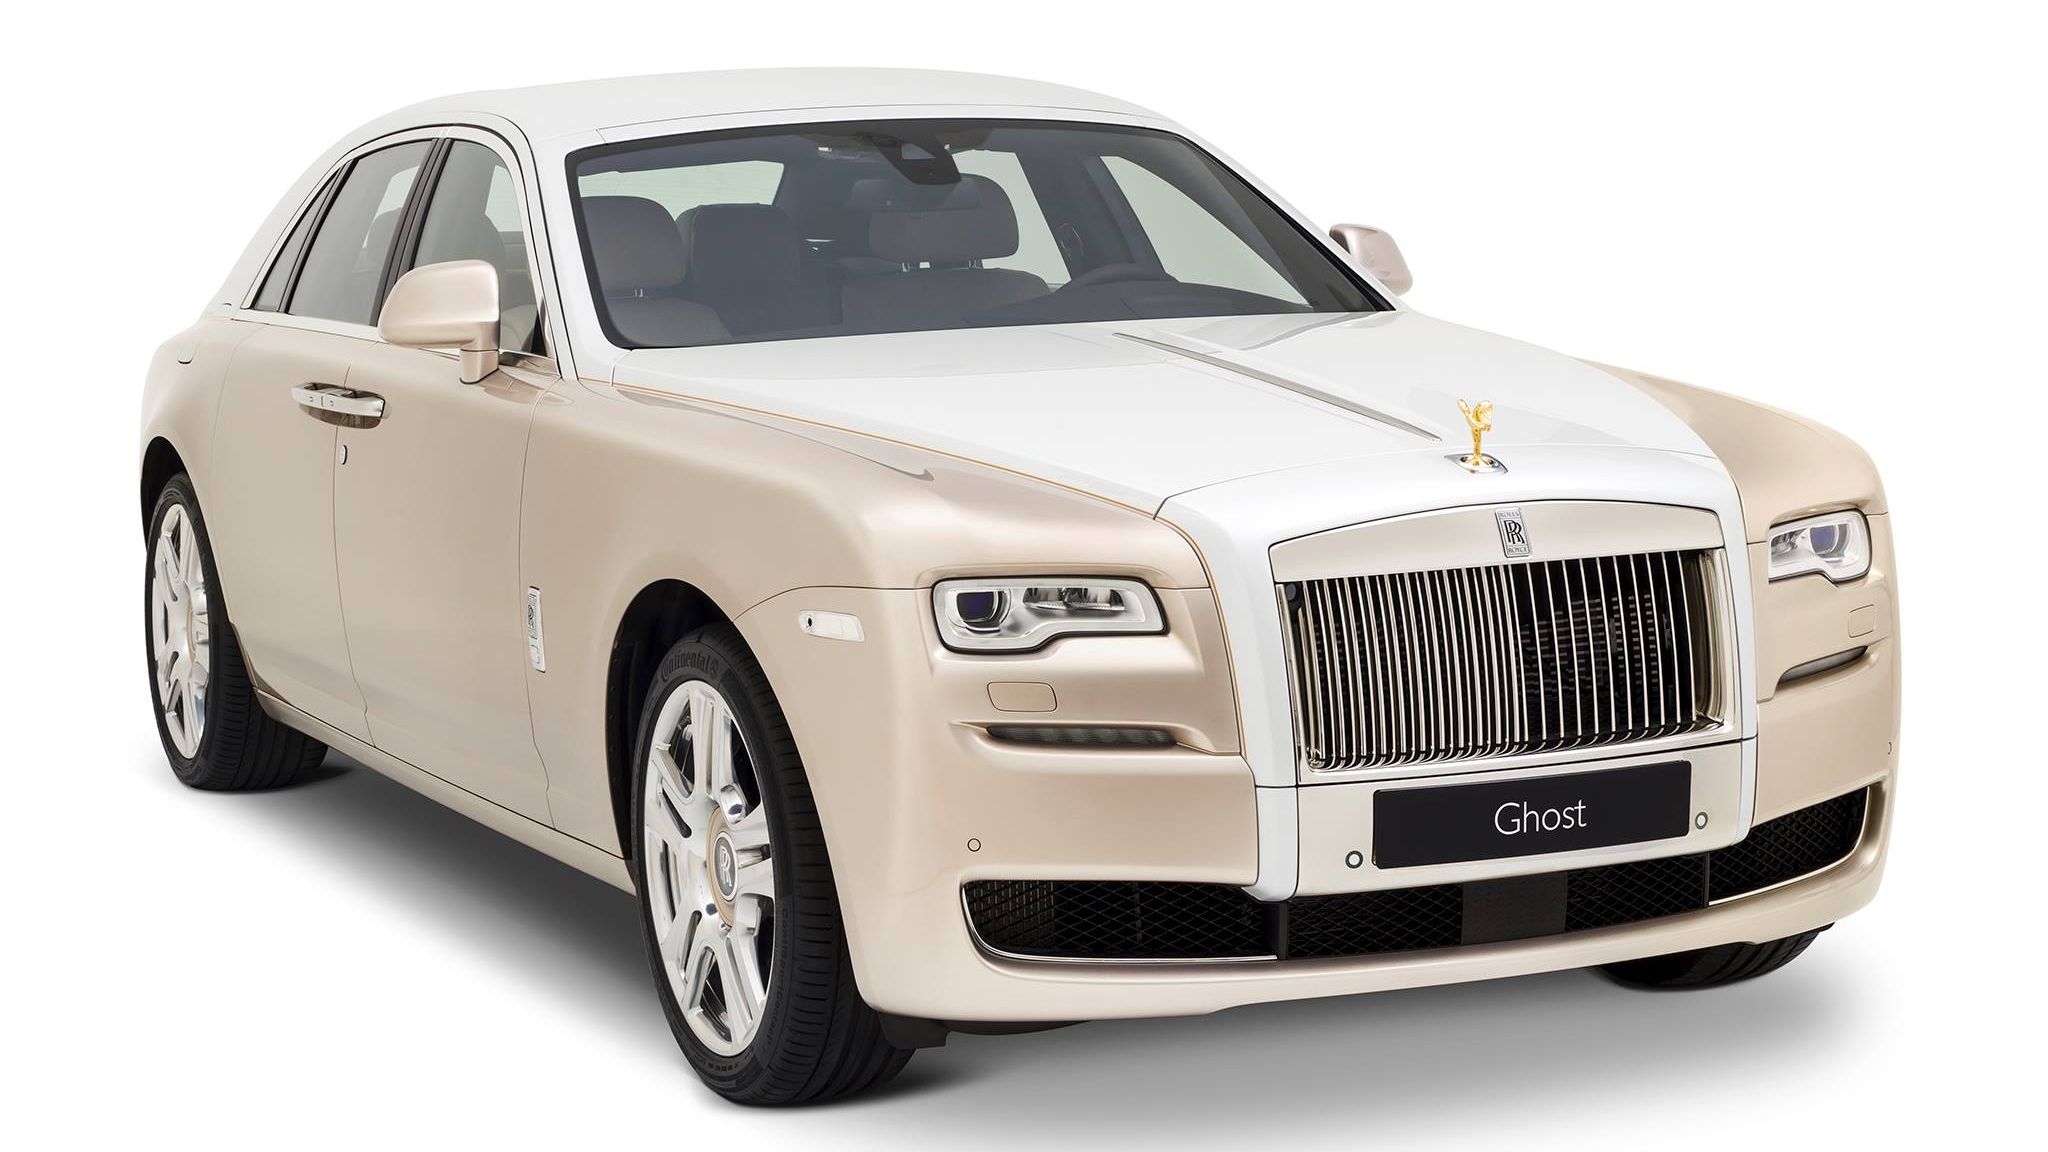 2017 Rolls-Royce Ghost Inspired by Ancient Trading Routes